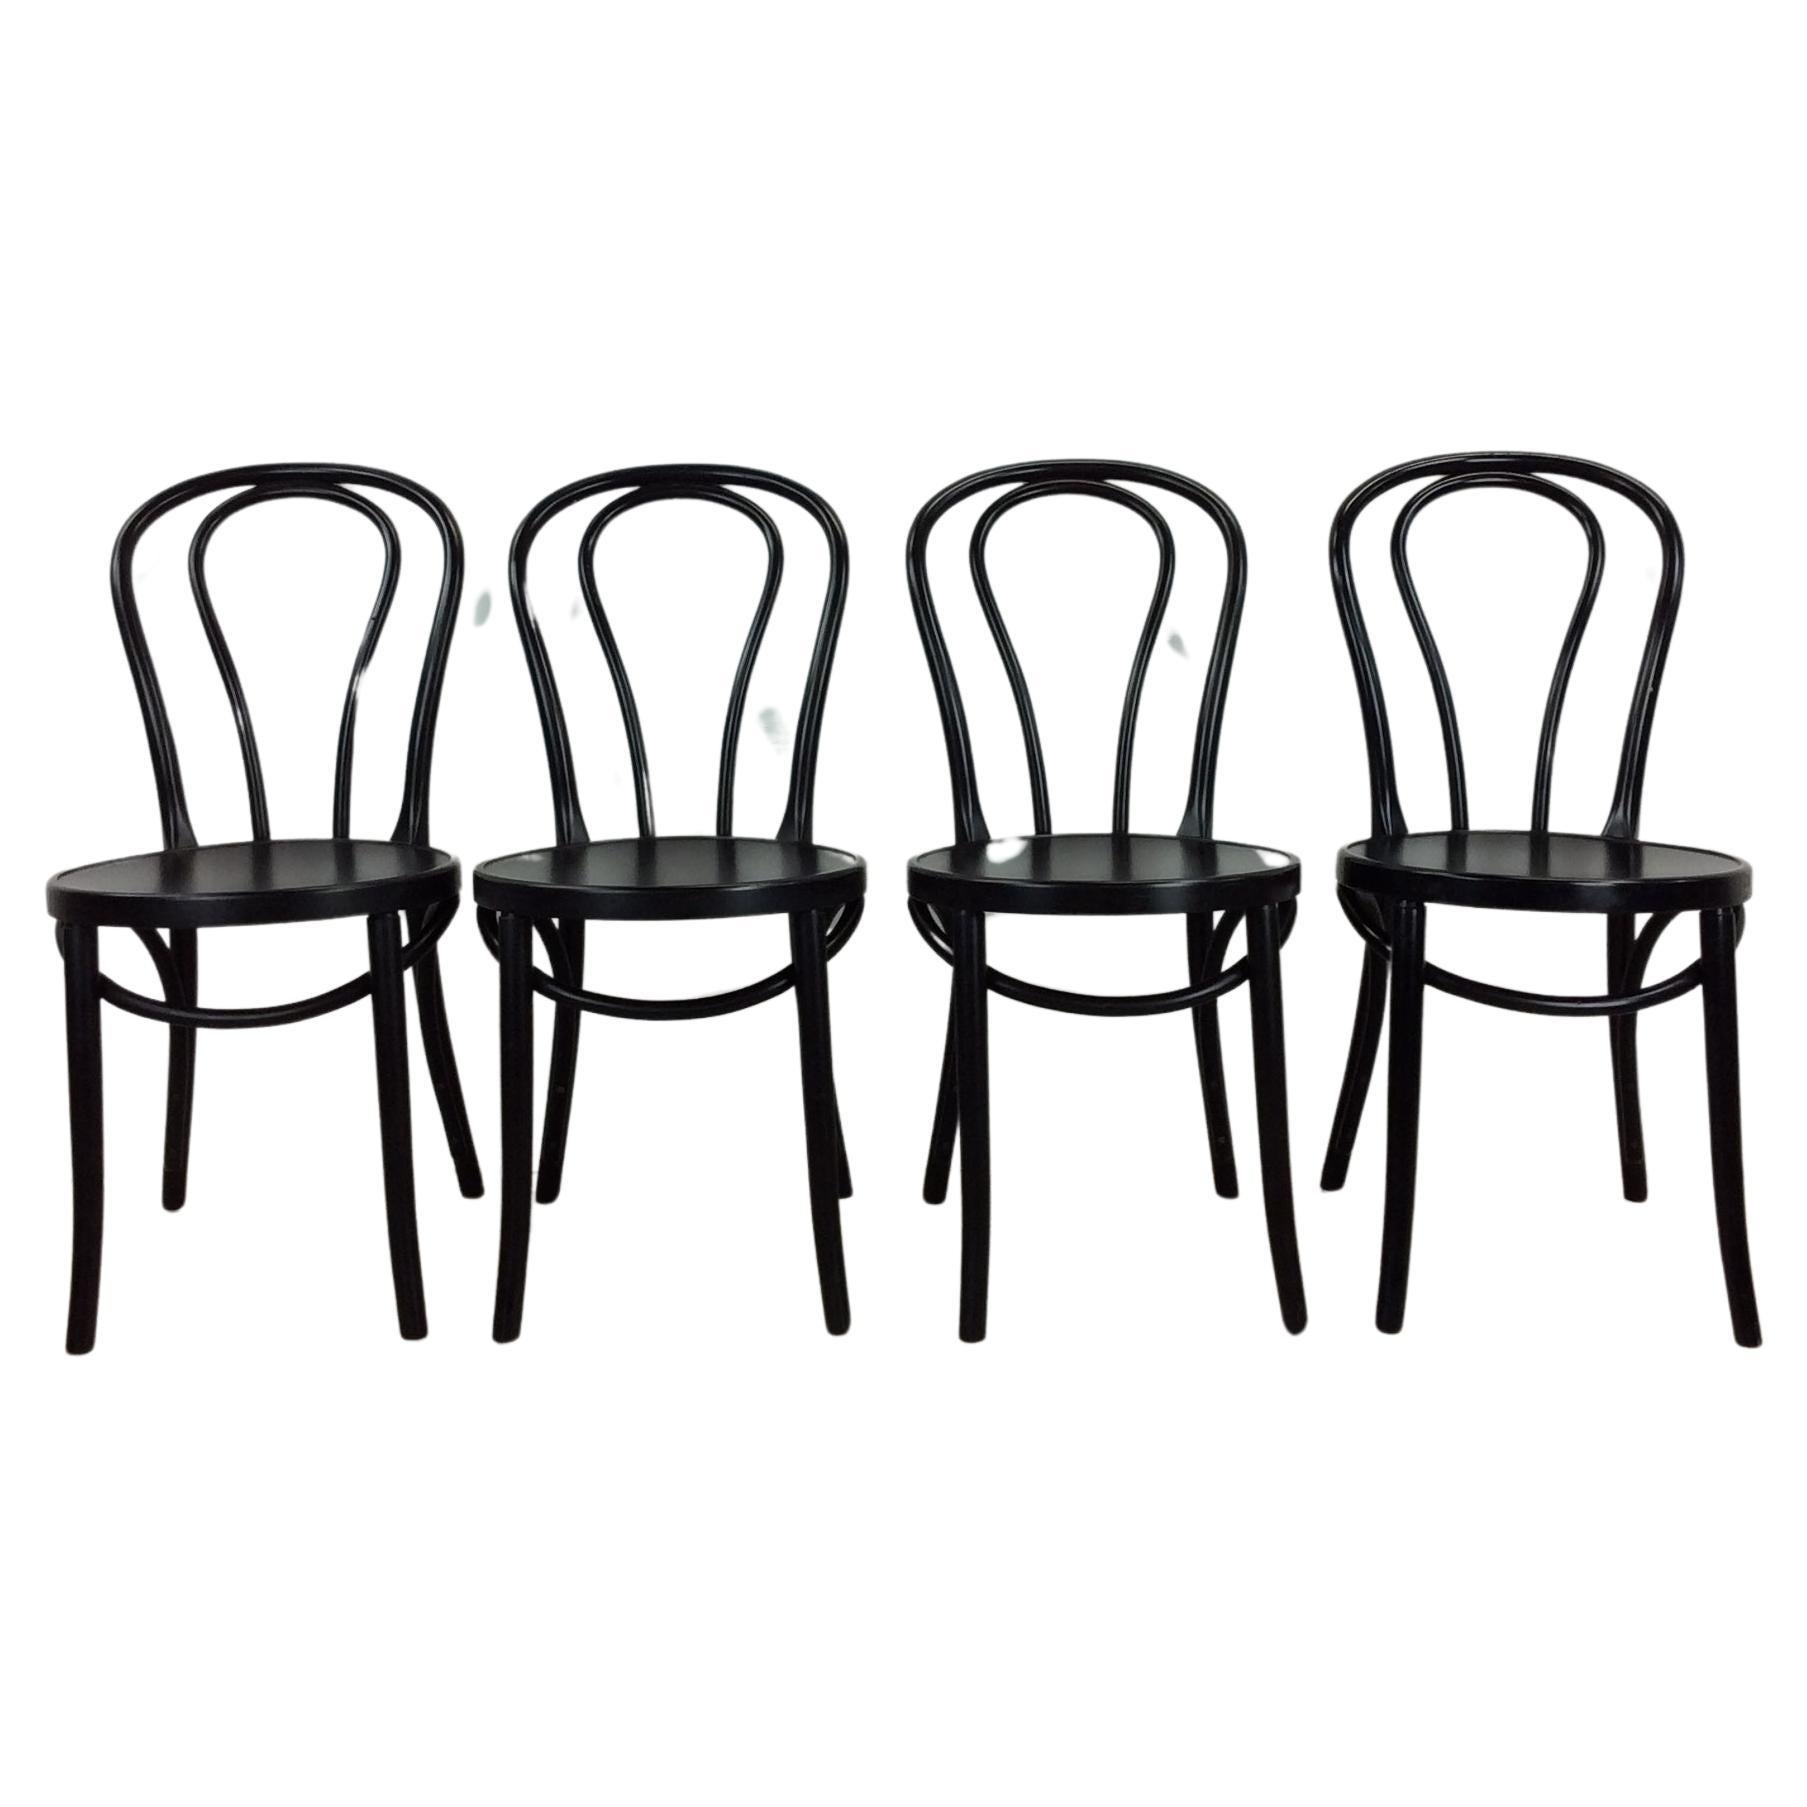 Set of 4 Vintage IKEA Black Cafe Style Chairs For Sale